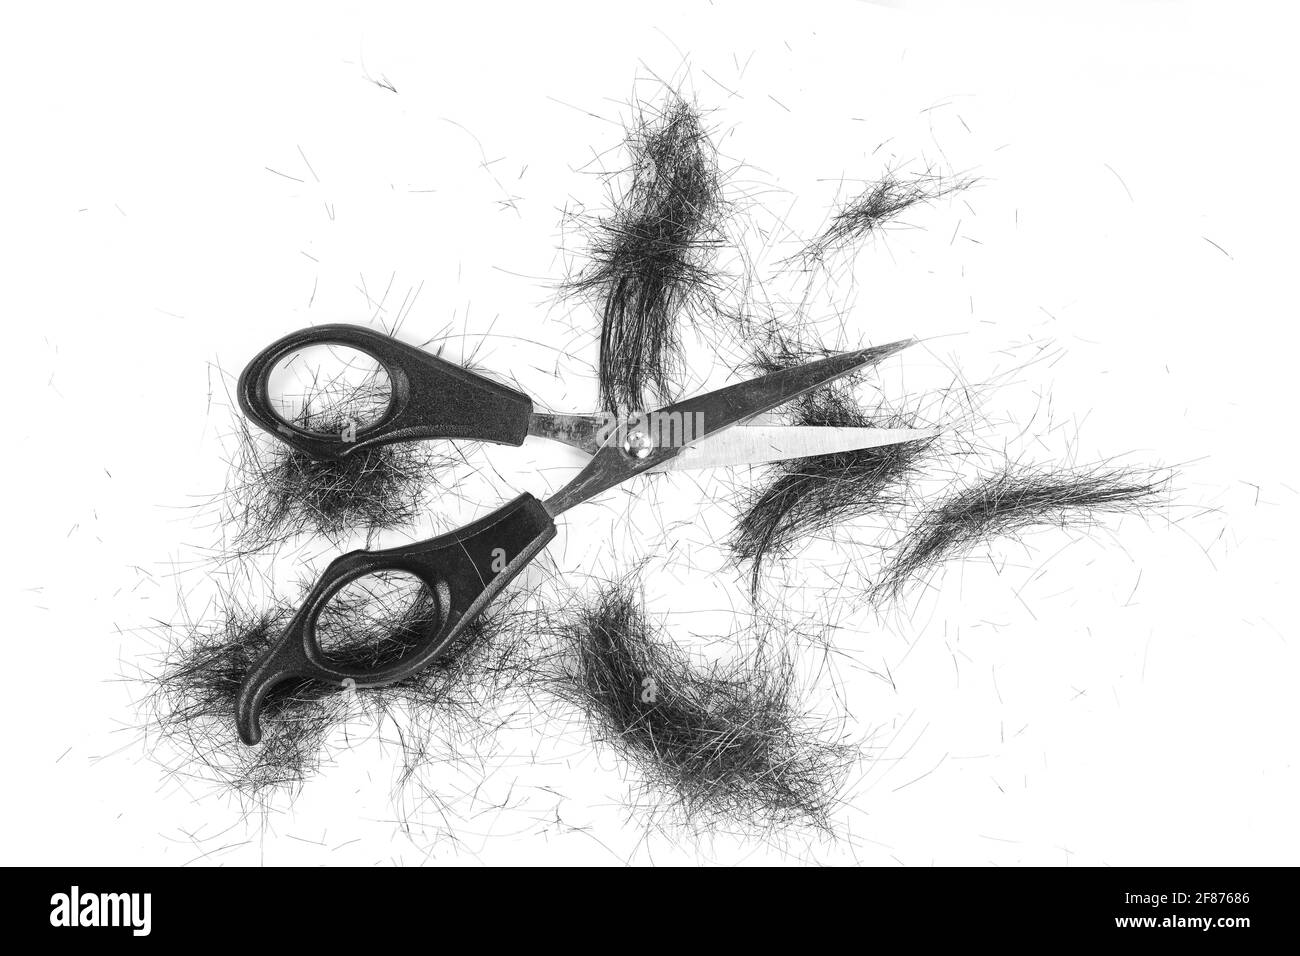 It is Cutting black hair, scissors and comb isolated on white. Black hair cut off on white background. Stock Photo